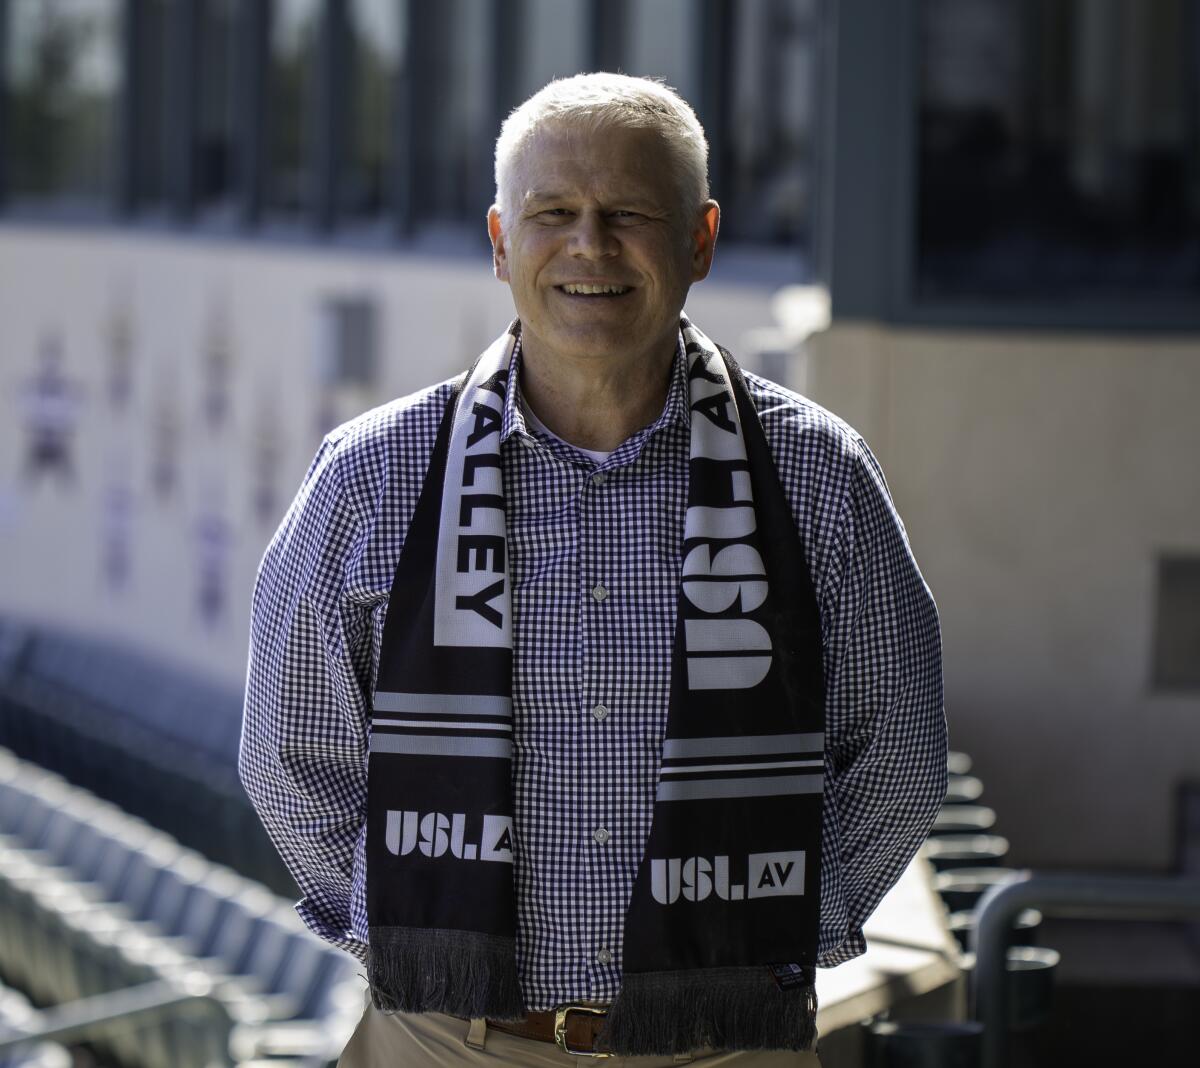 John Smelzer, founder and president of the Antelope Valley USL franchise, stands for a portrait